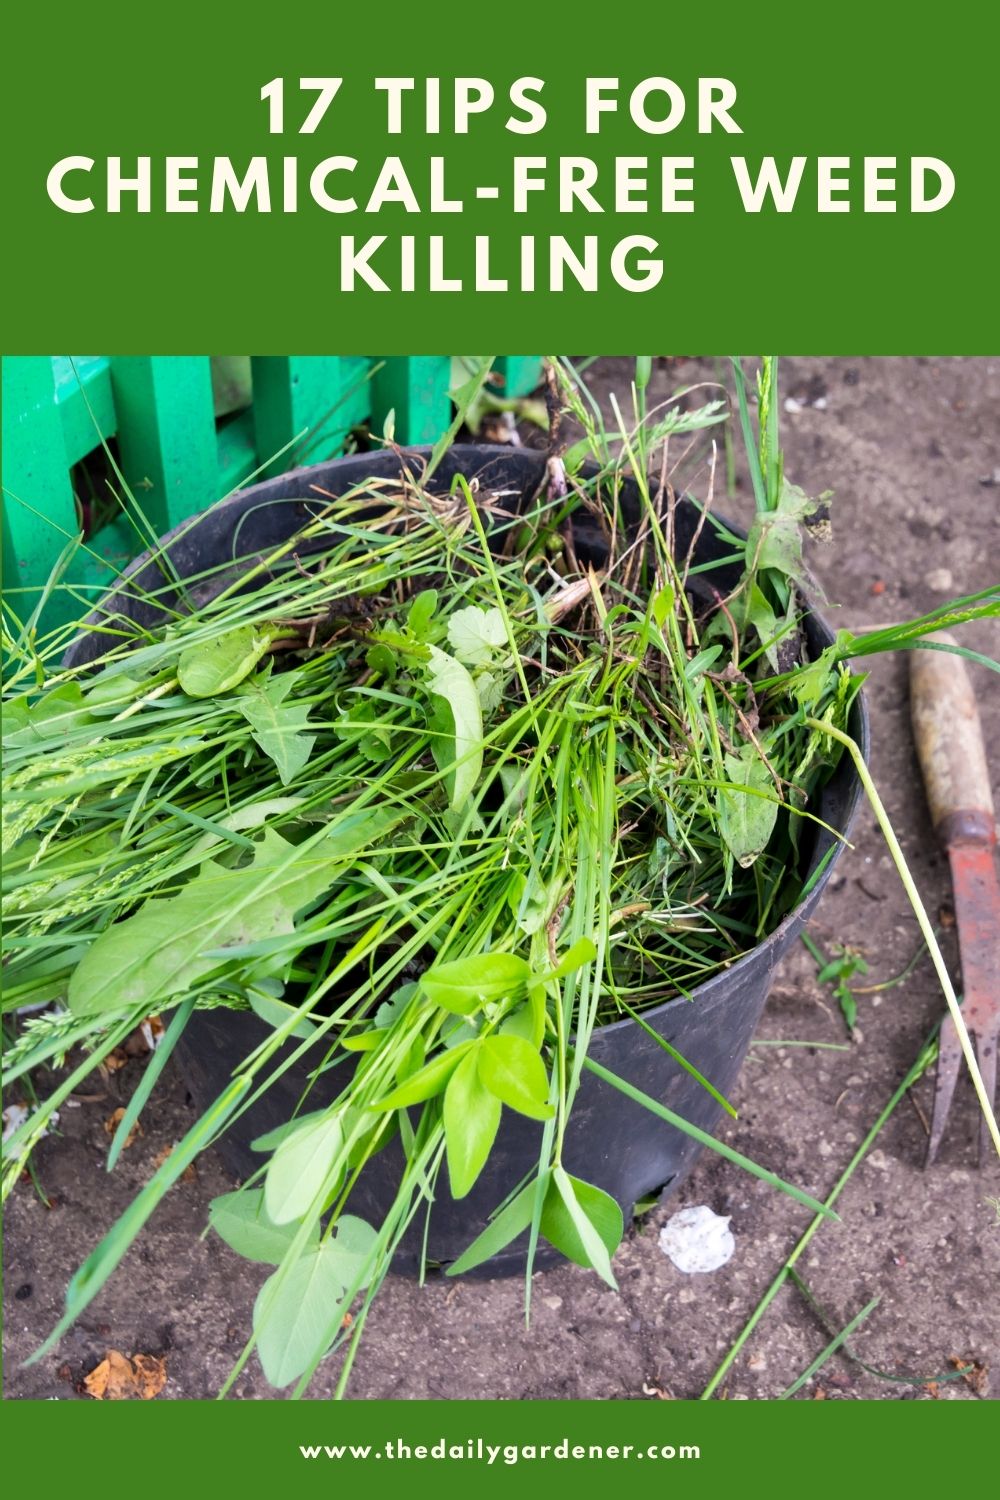 17 Tips for Chemical-Free Weed Killing 2